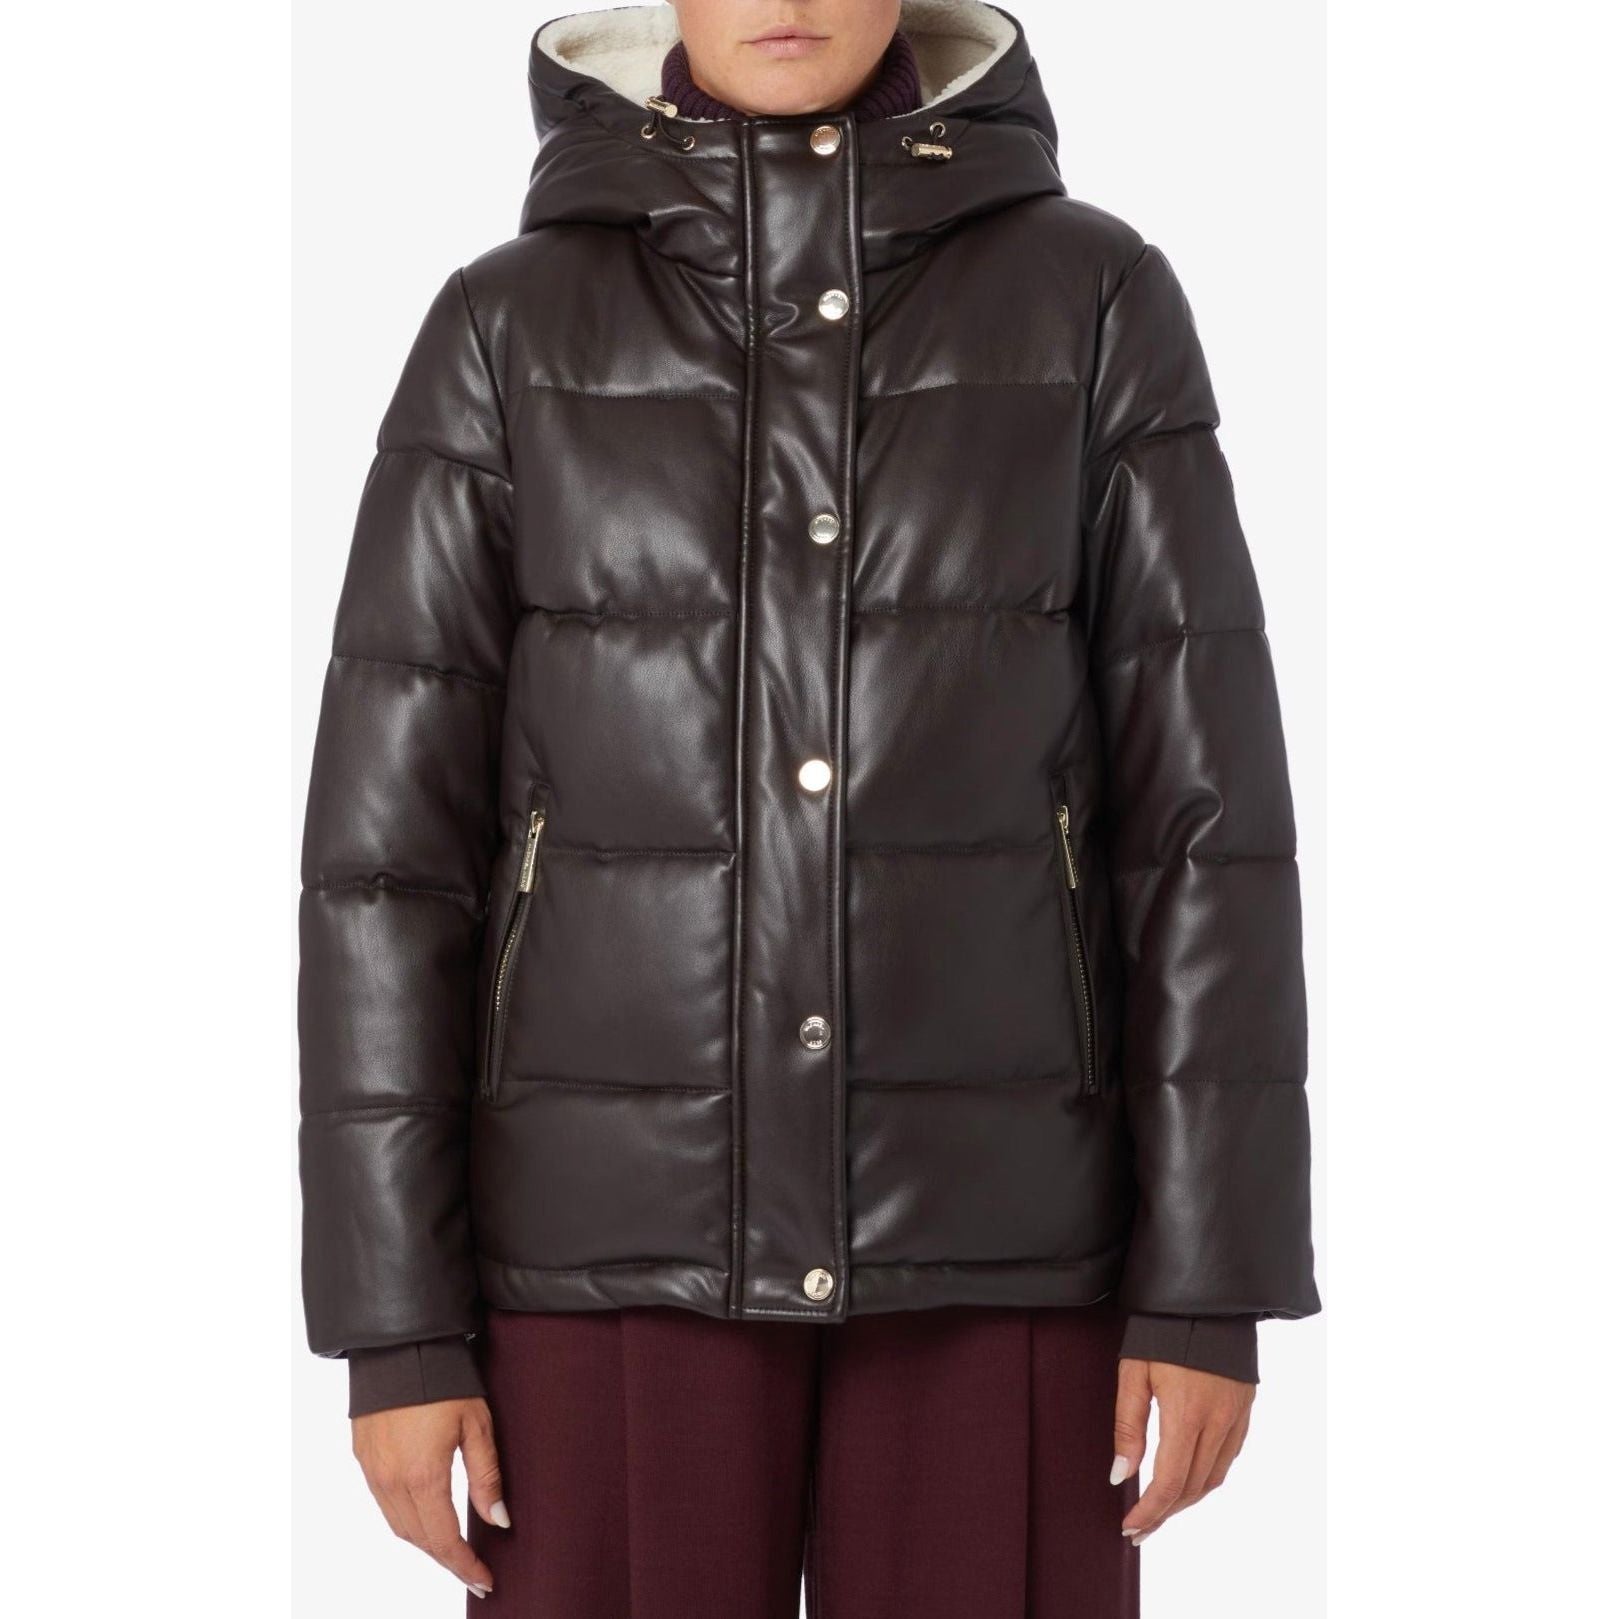 Micheal Kors - Faux Leather Puffer in Dark Brown-SQ4316979